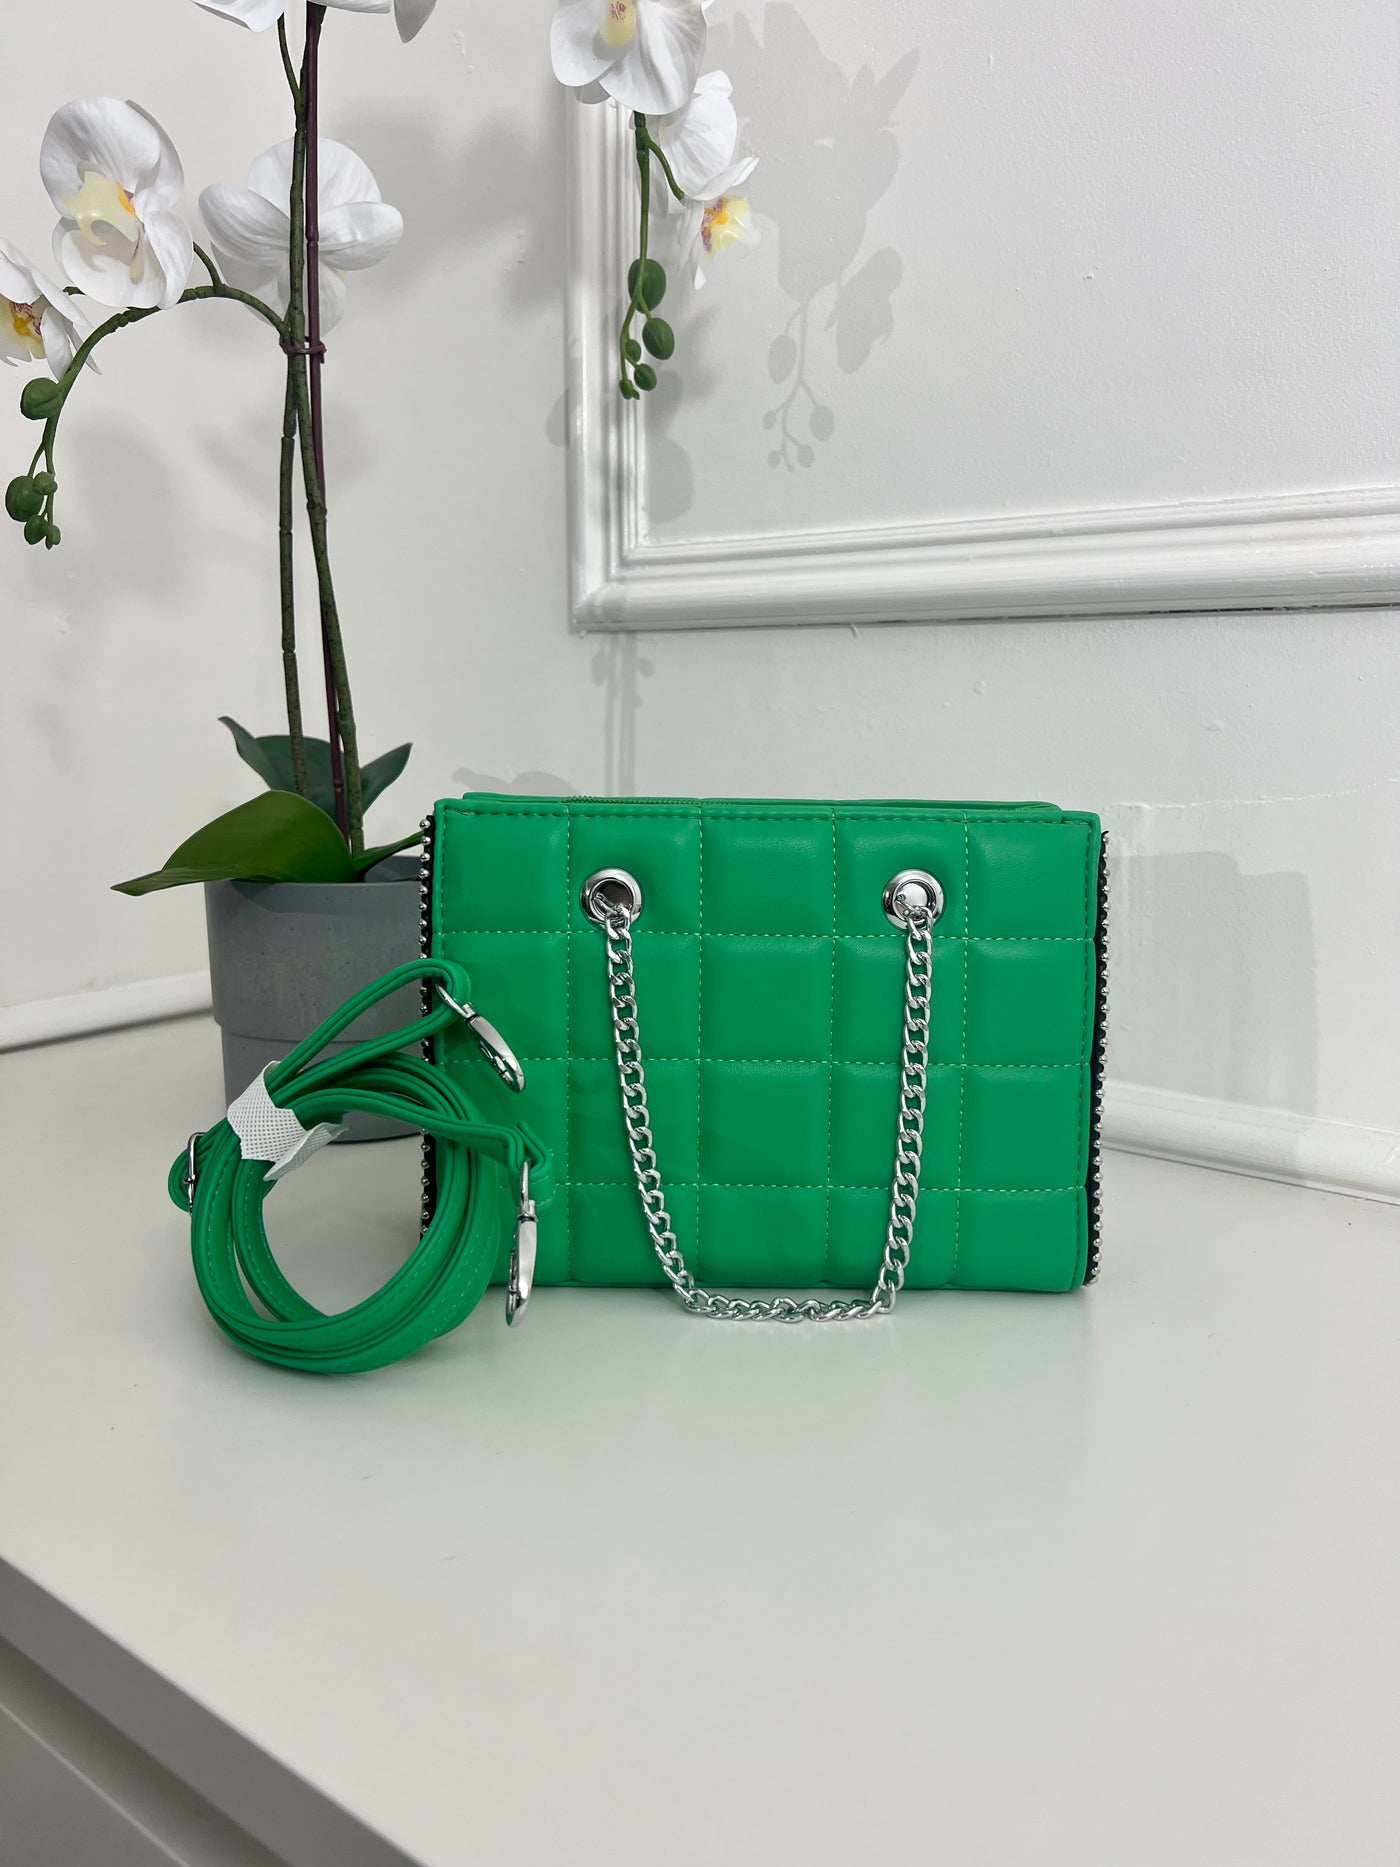 GREEN QUILTED HANDBAG WITH CHAIN HANDELS AND LEATHER STRAP BAG